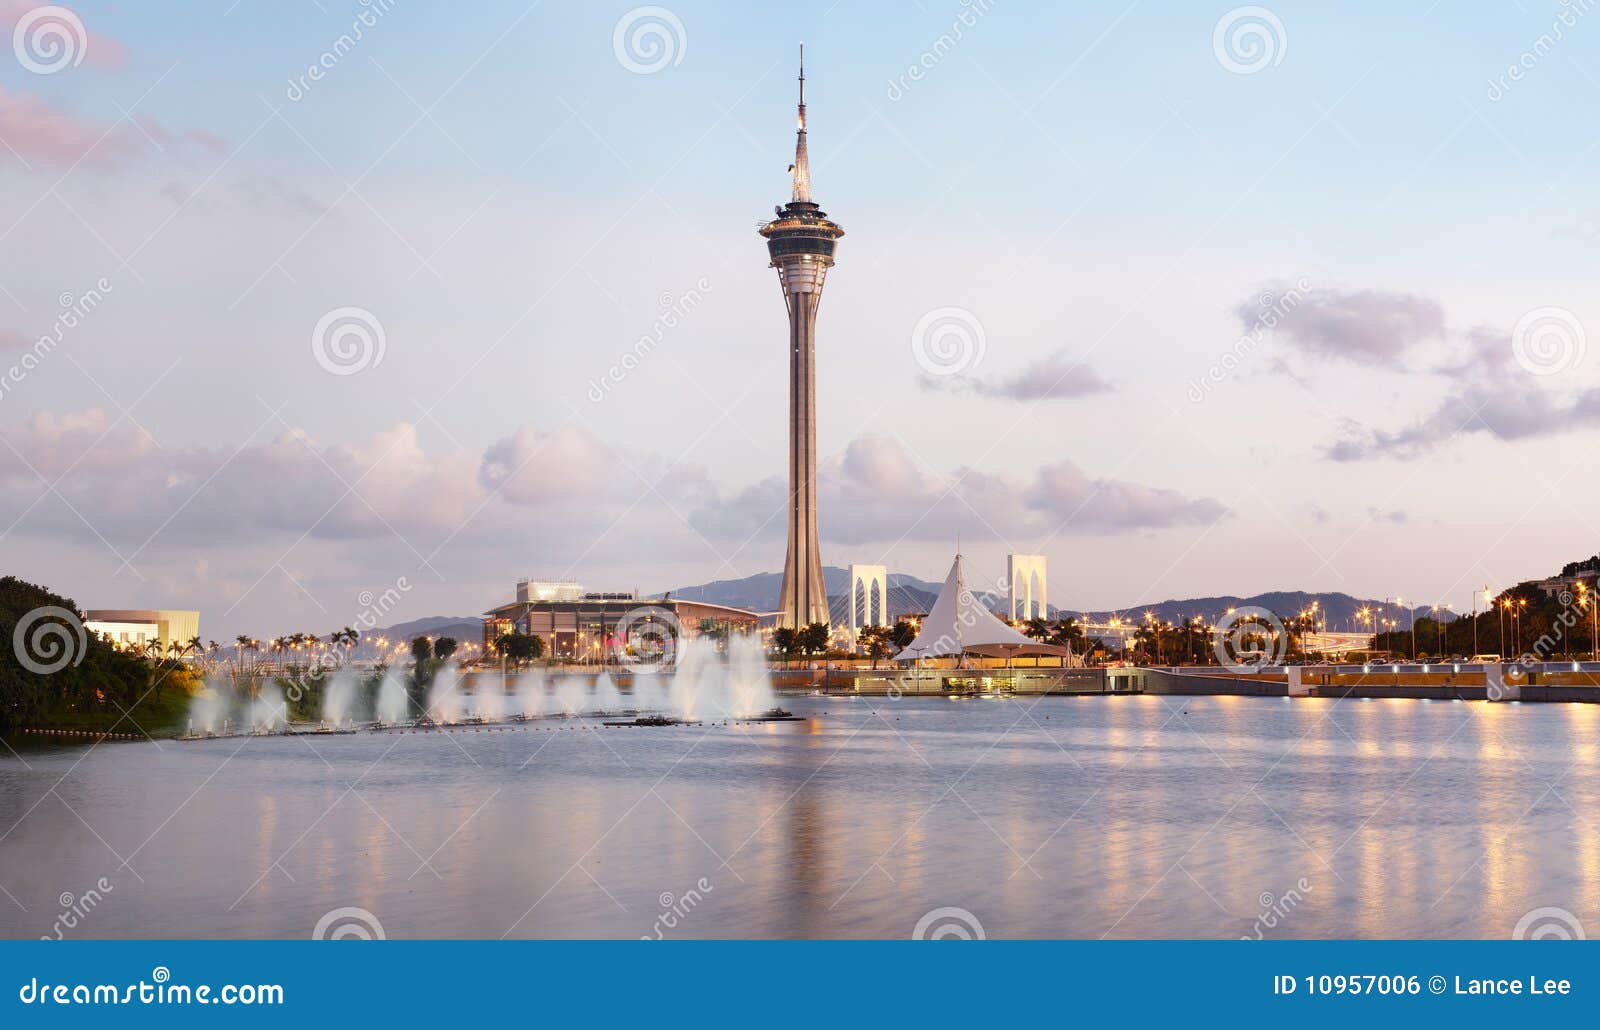 macau tower by waterfront of macao, china